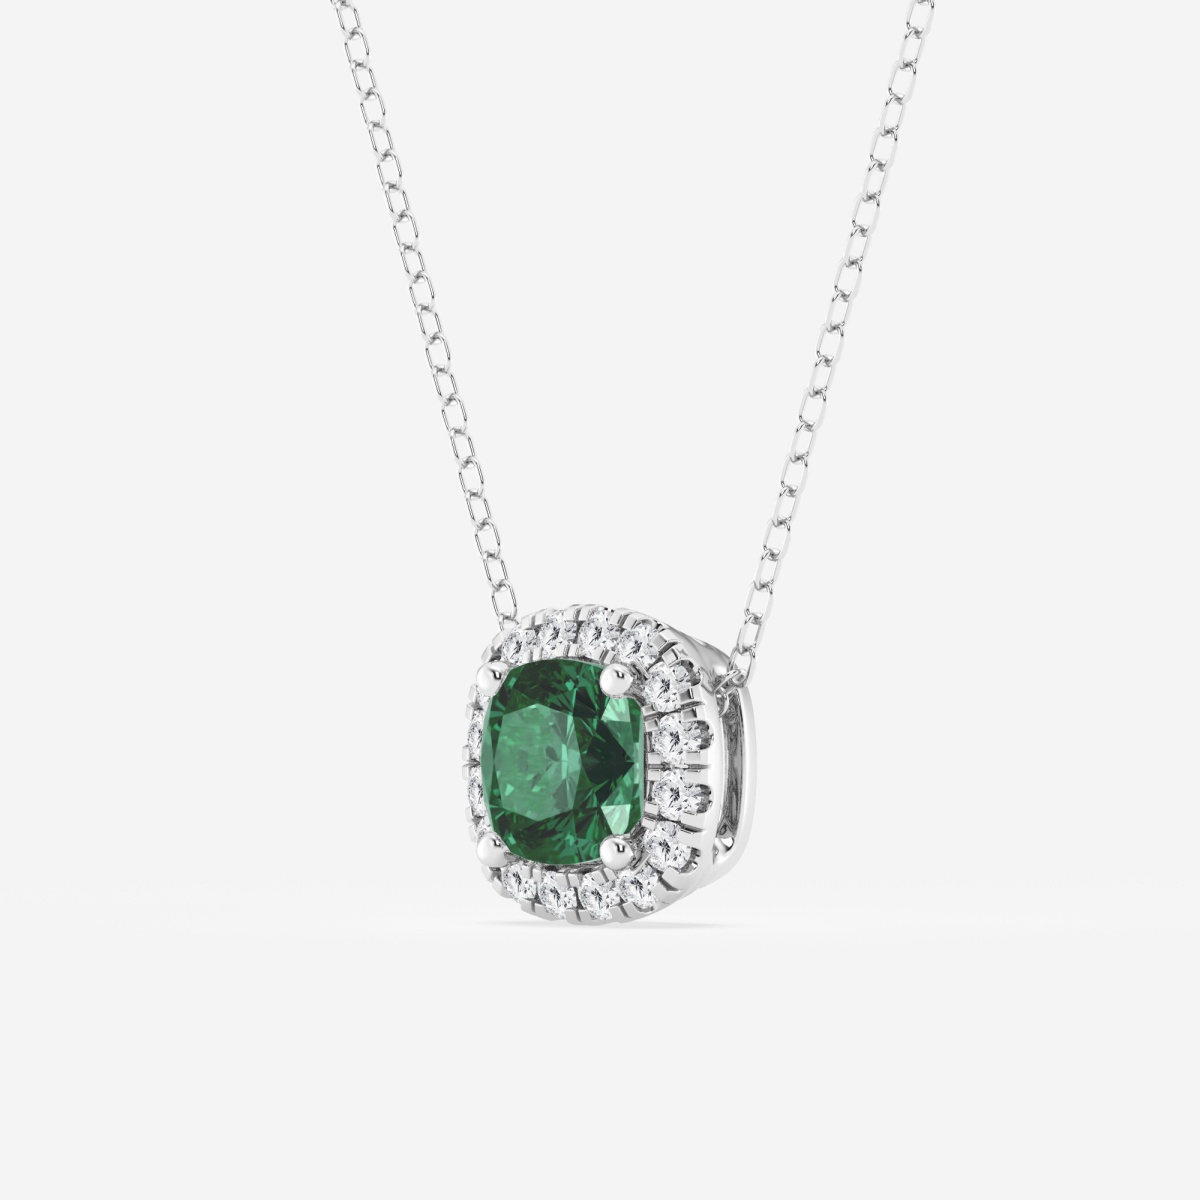 Additional Image 1 for  5.7x5.5 mm Cushion Cut Created Emerald and 1/5 ctw Round Lab Grown Diamond Halo Pendant with Adjustable Chain